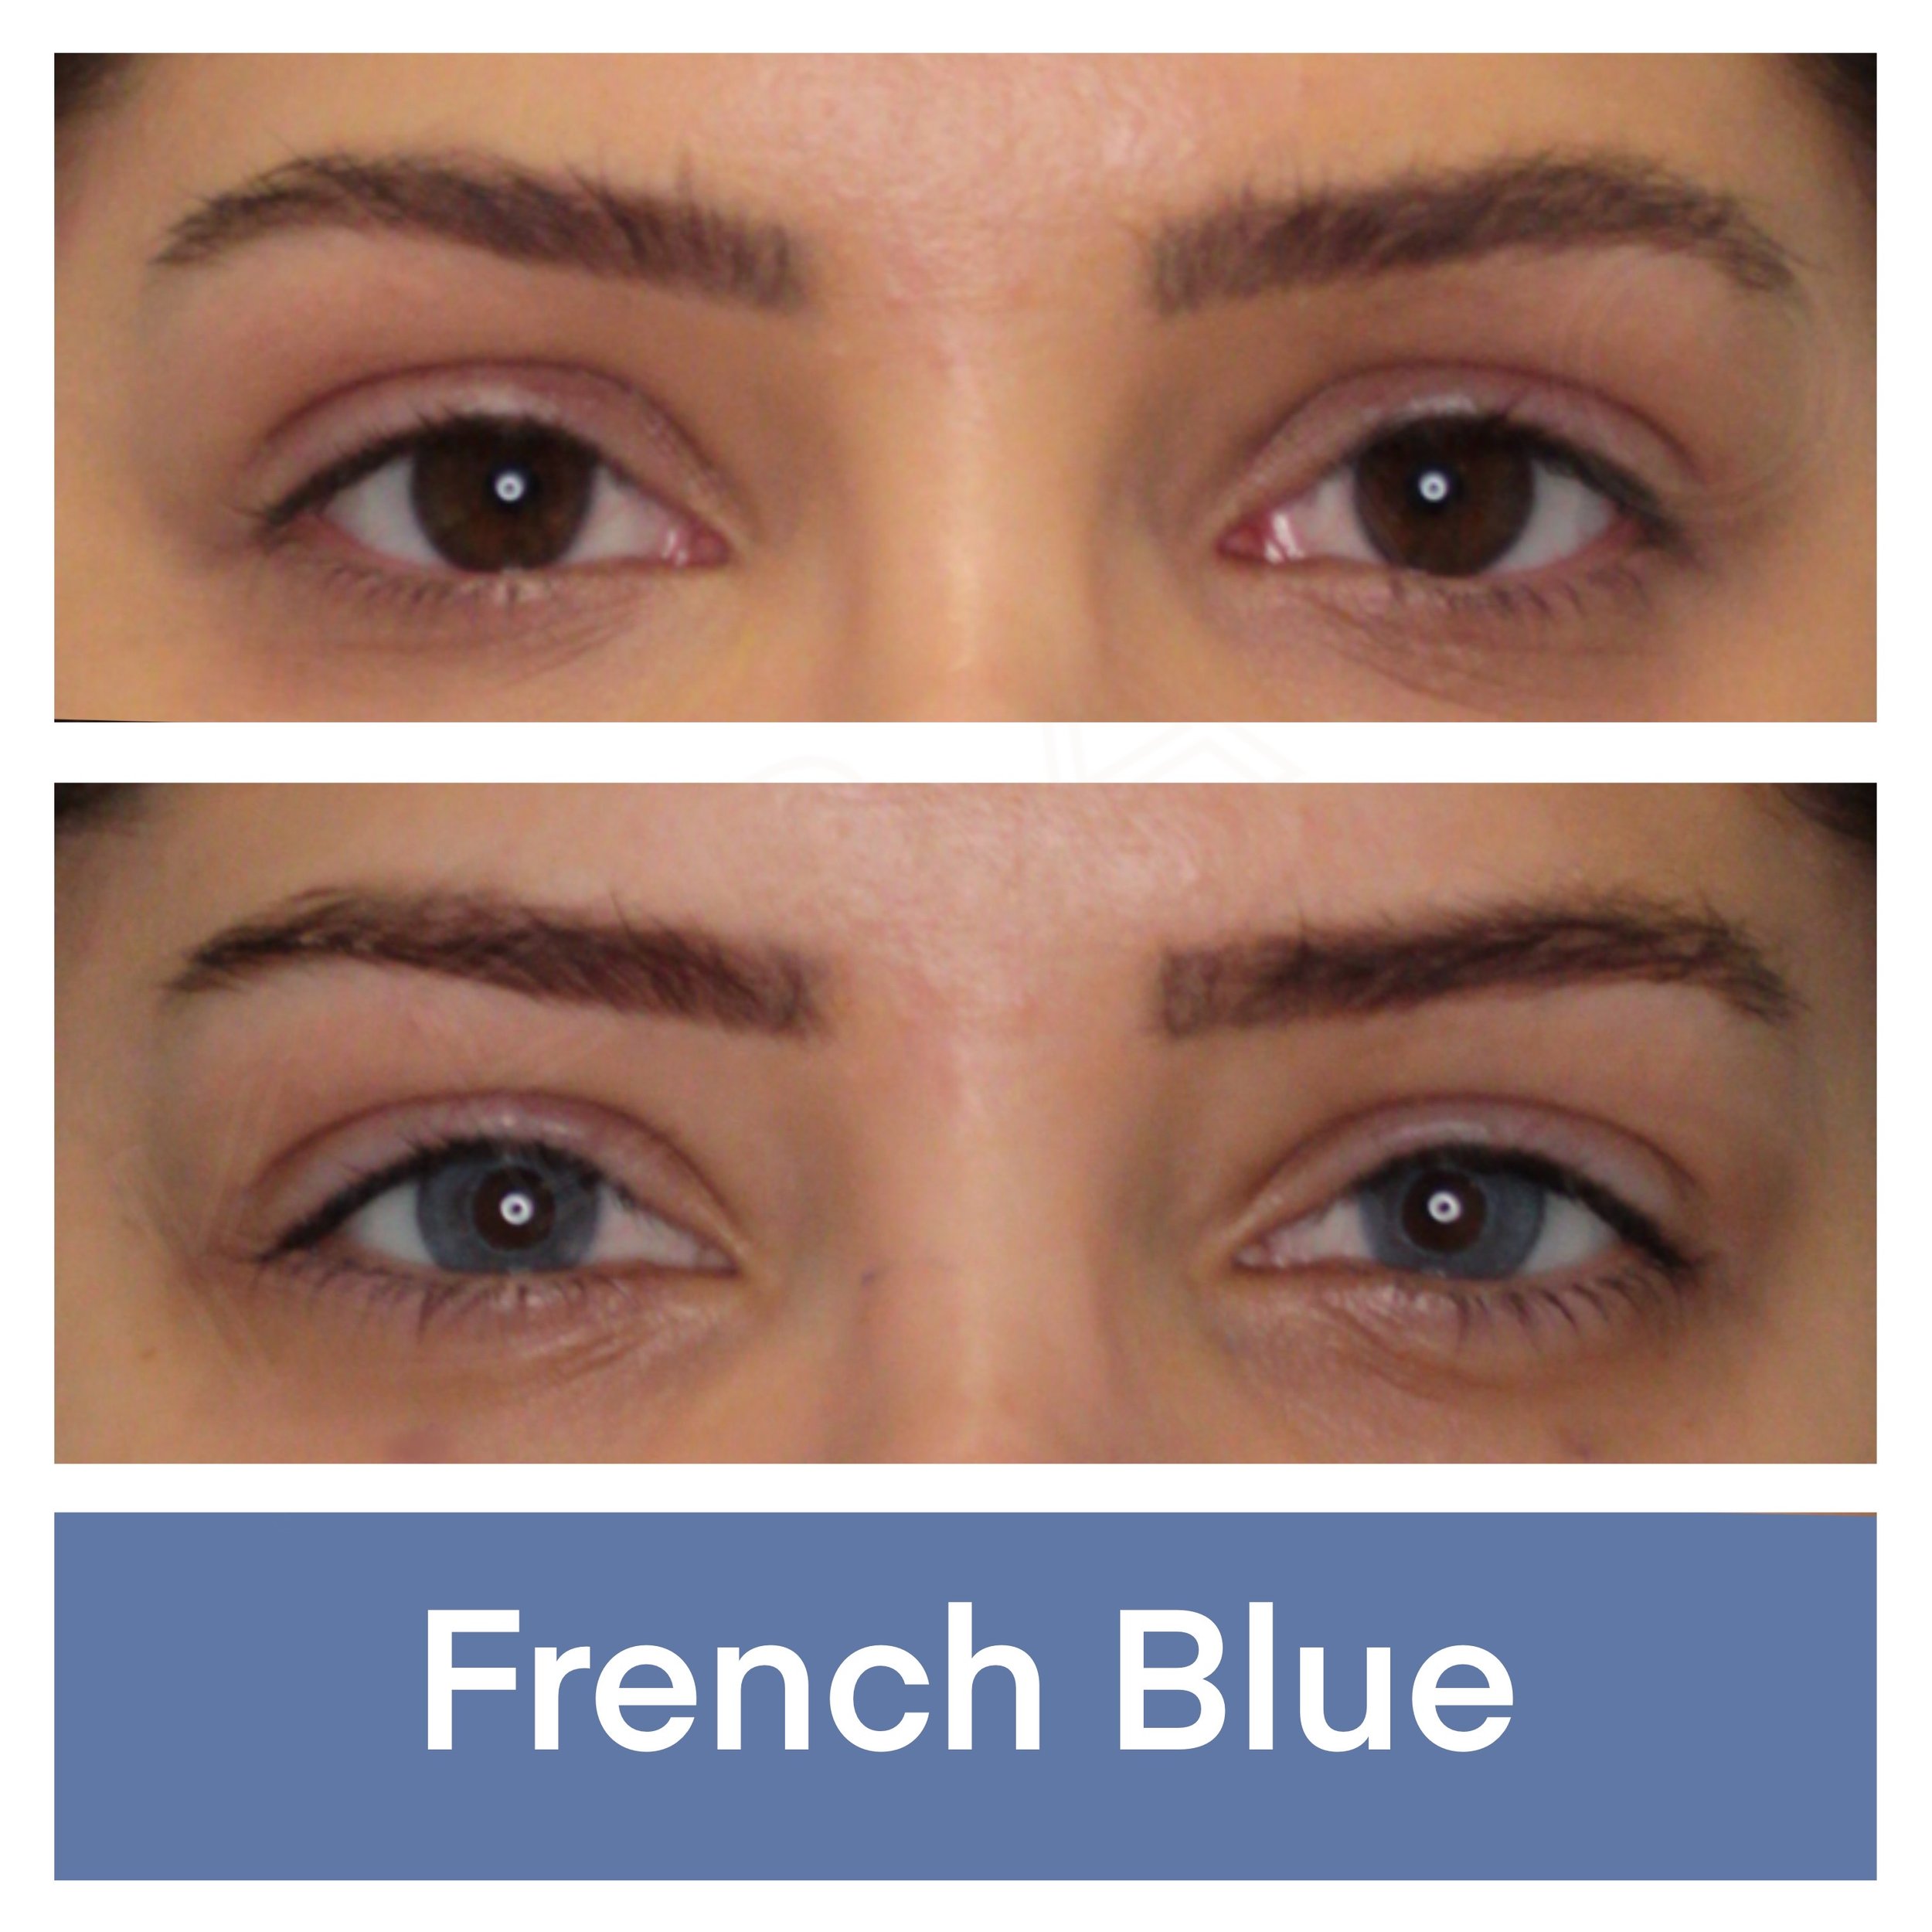 Kerato Procedure with French Blue Pigment